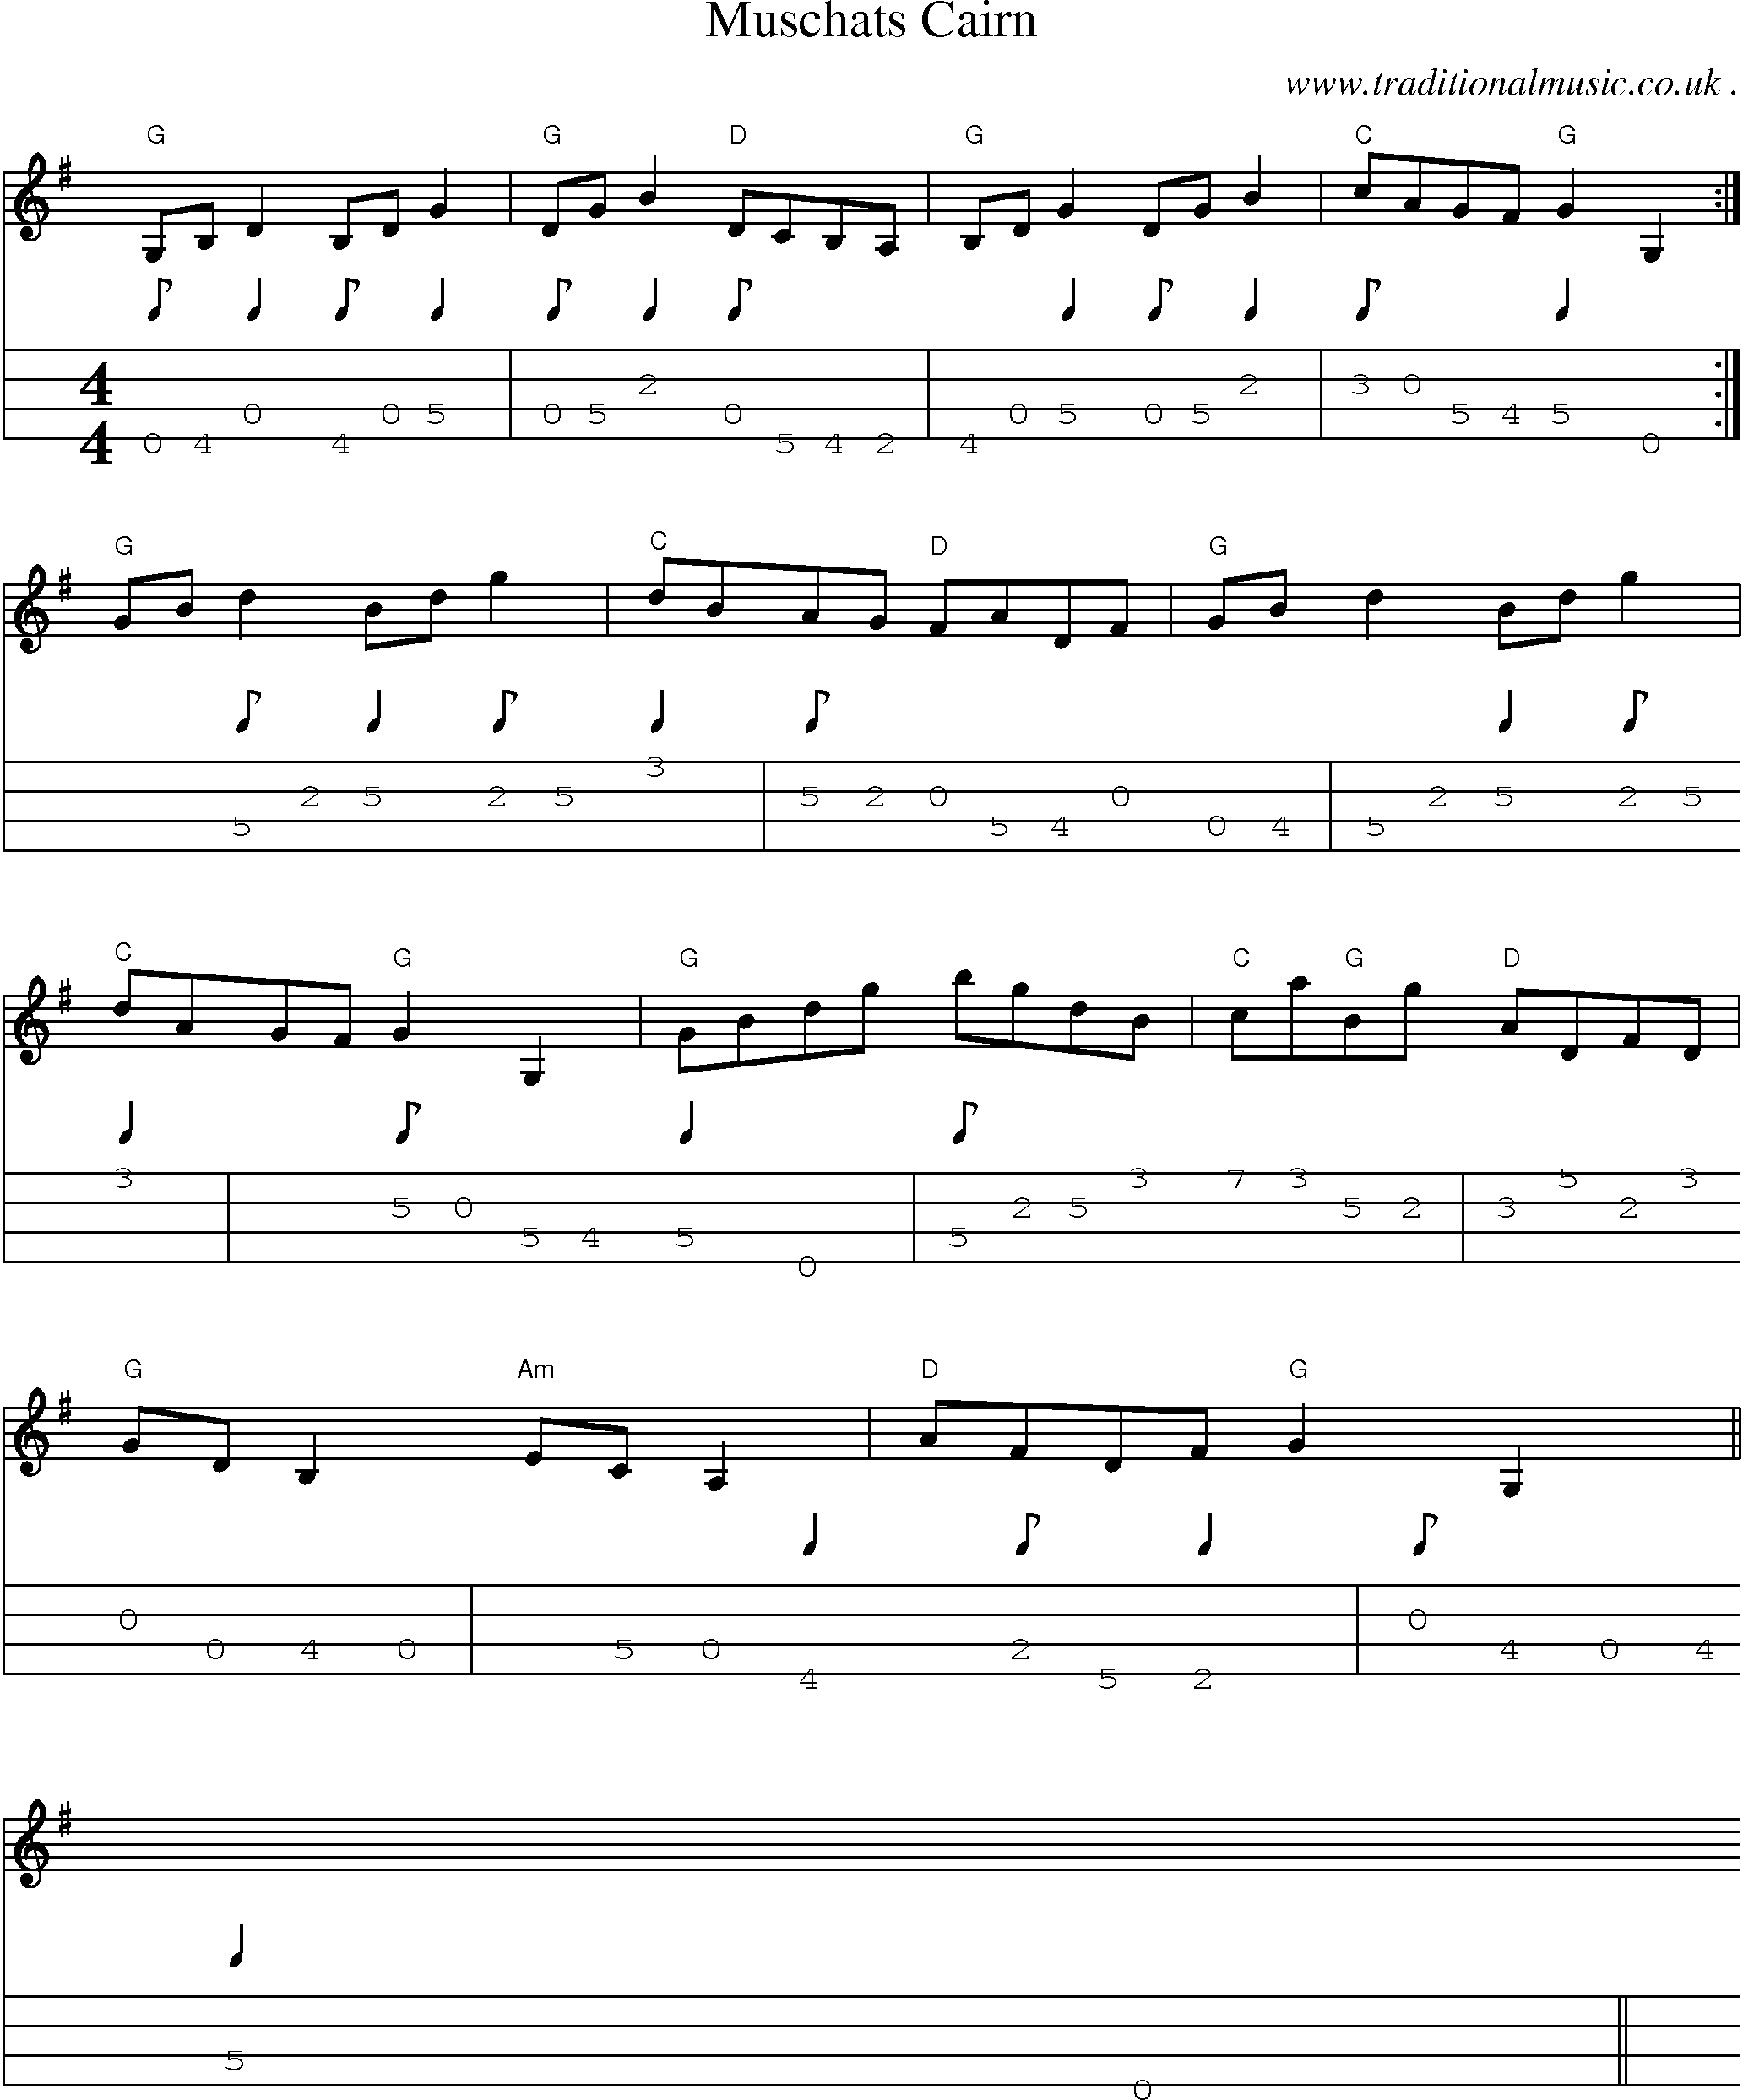 Sheet-music  score, Chords and Mandolin Tabs for Muschats Cairn